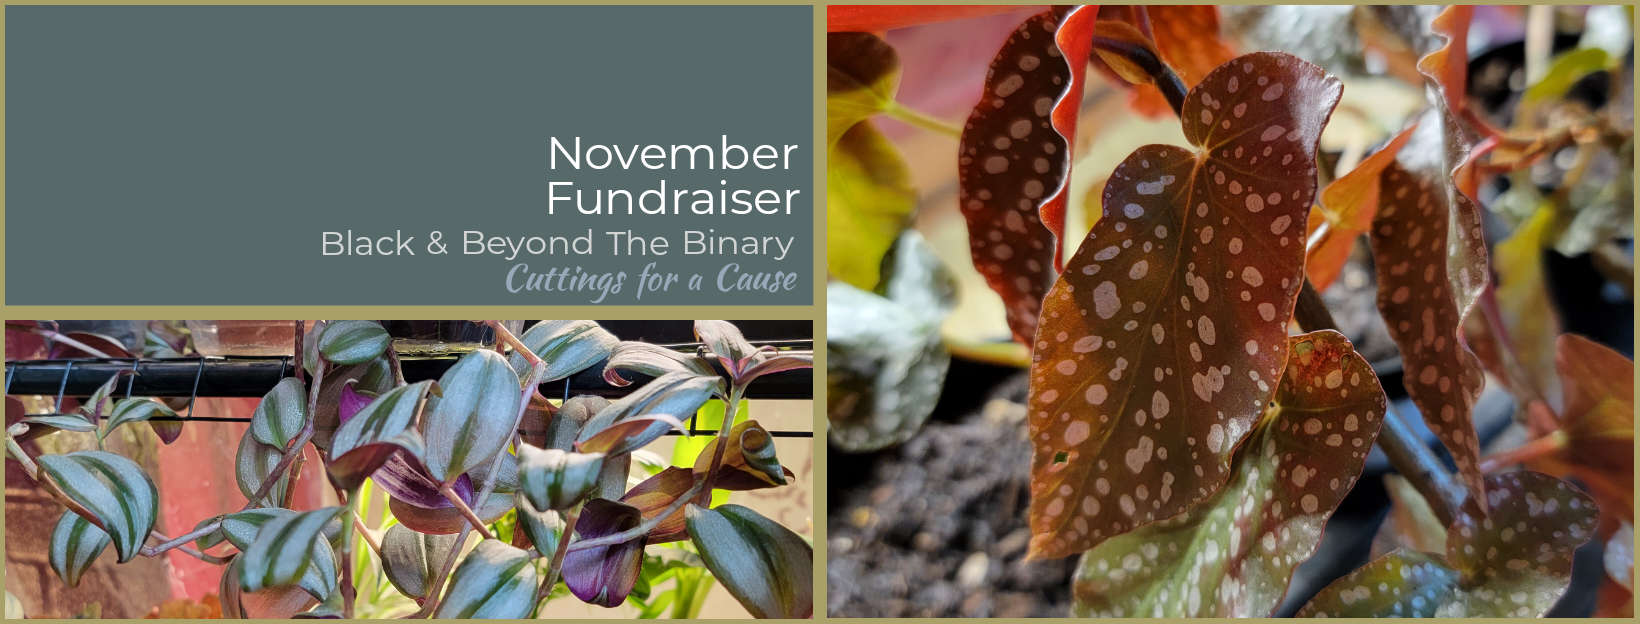 Black & Beyond Binary Collective: November Fundraiser at Home Grown Apothecary